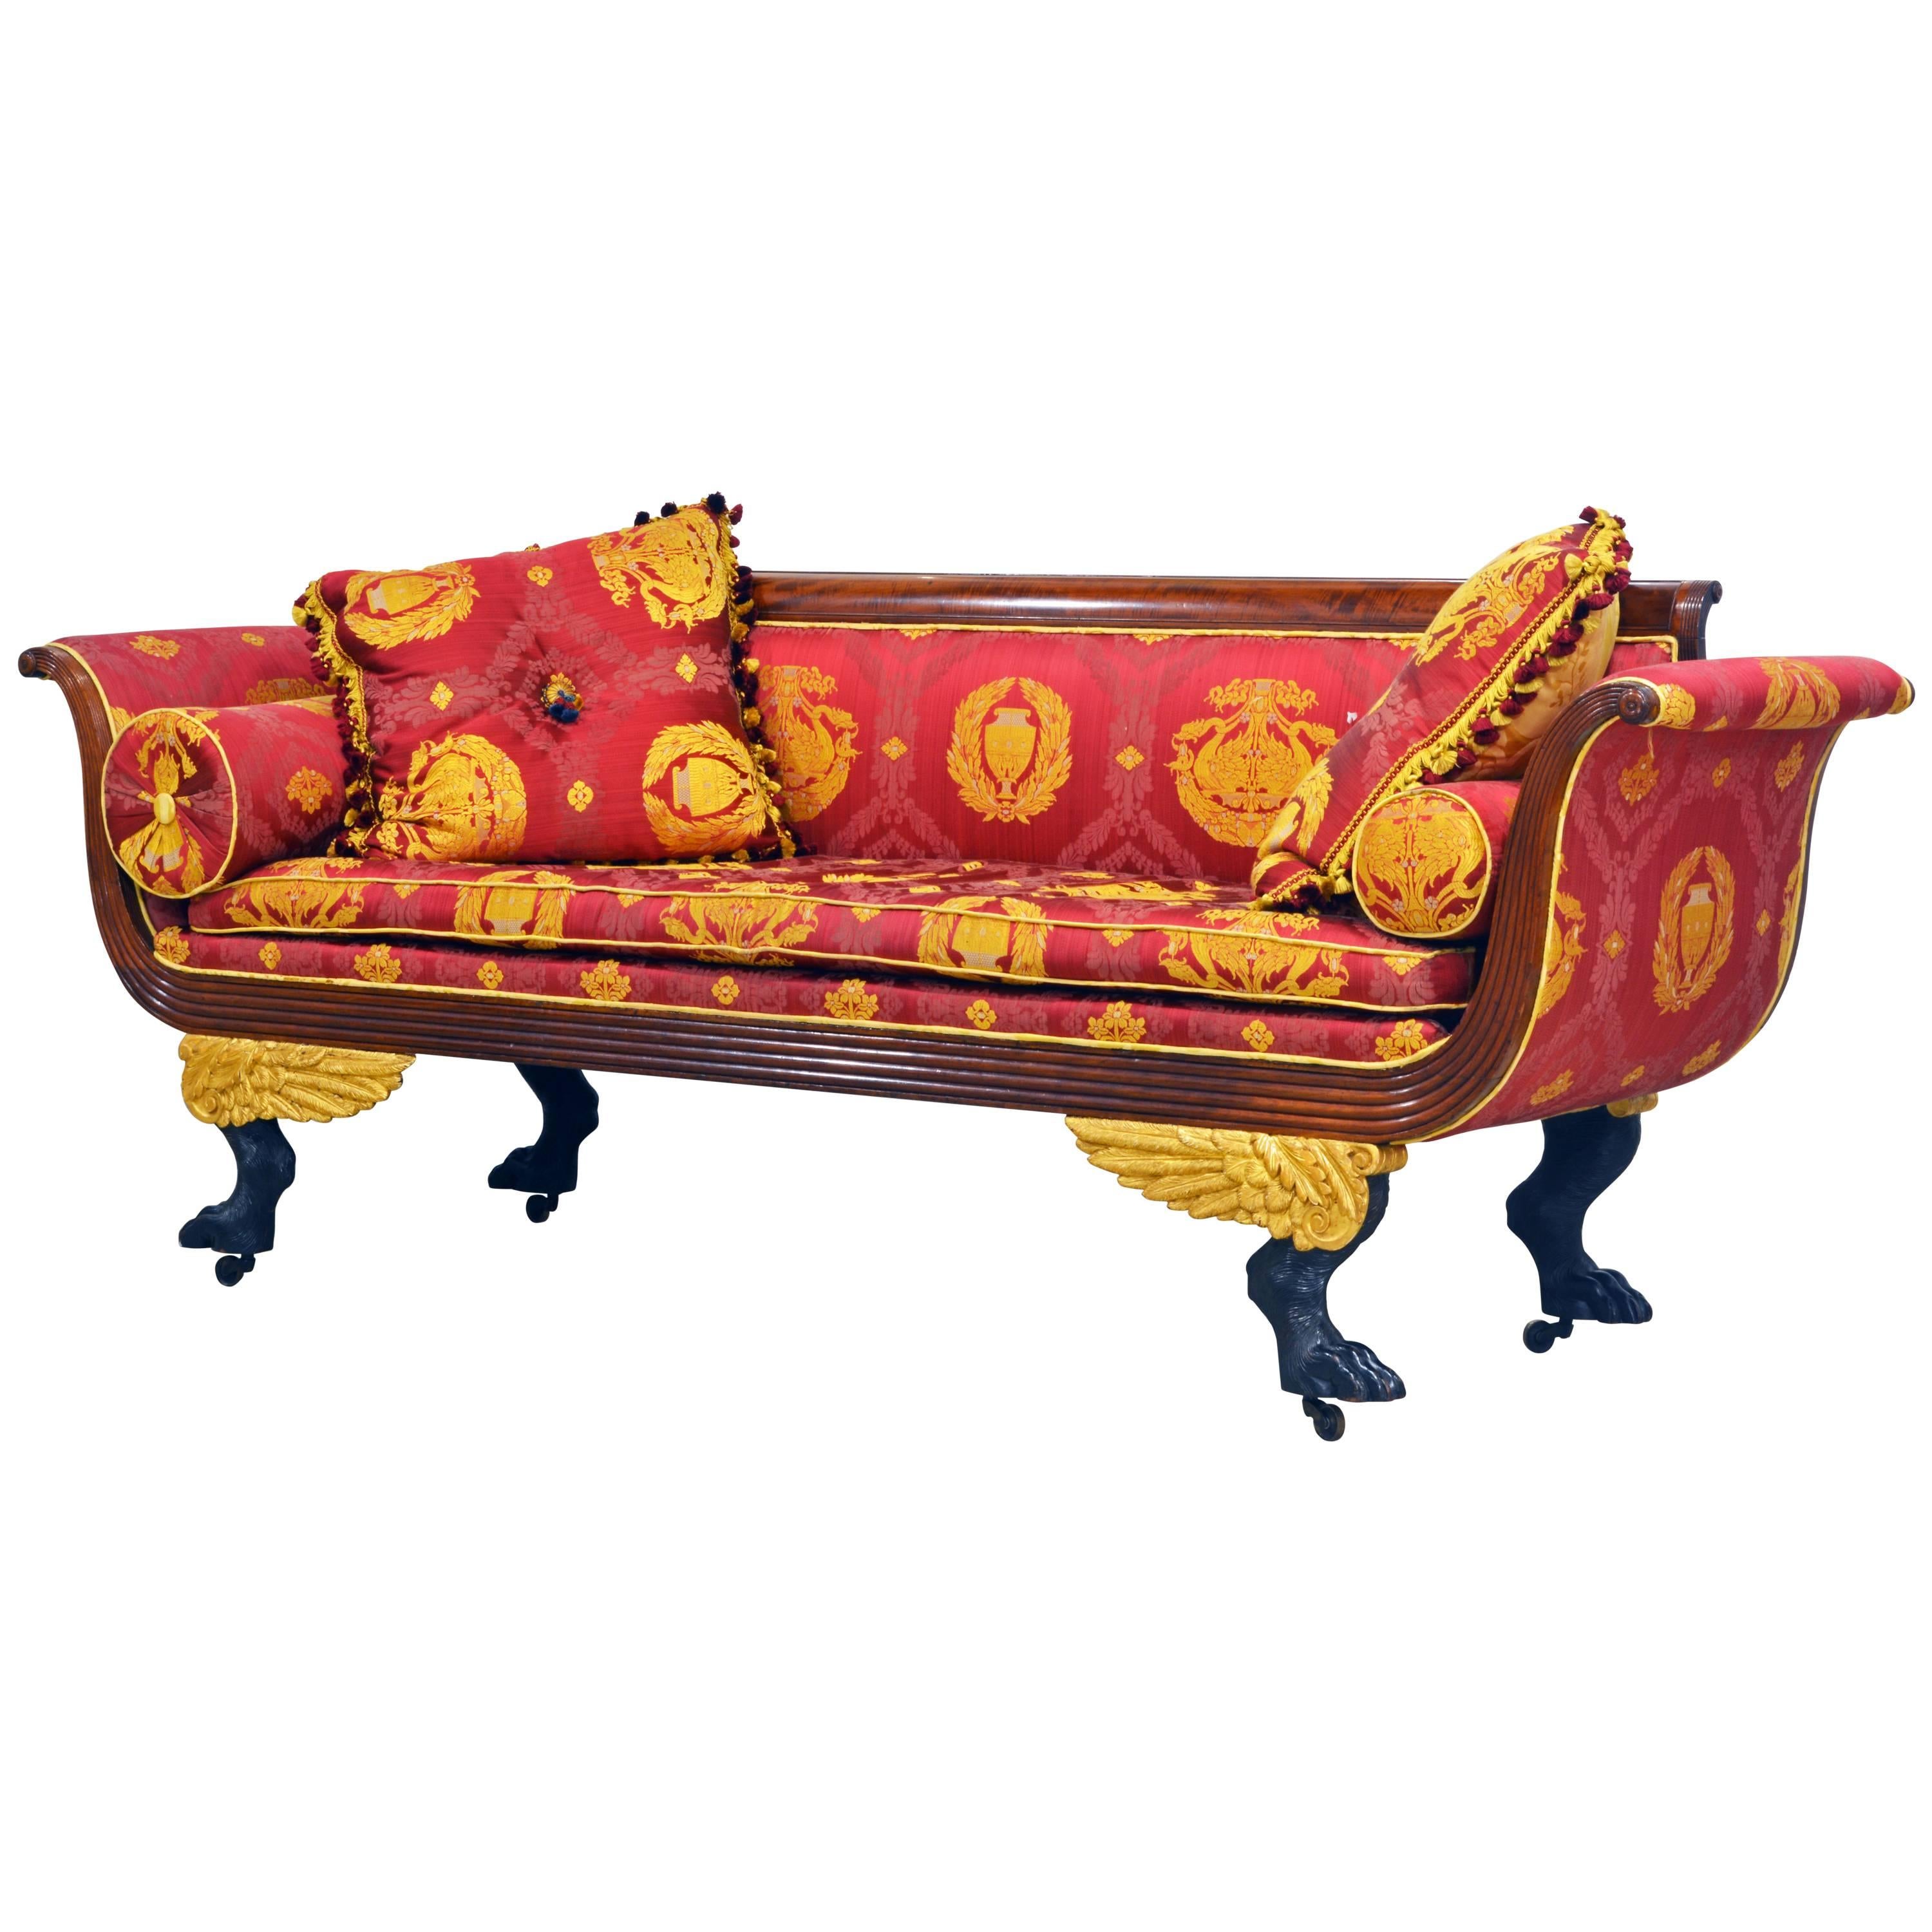 Stunning Gianni Versace Fabric Covered American First Period Empire Carved Sofa